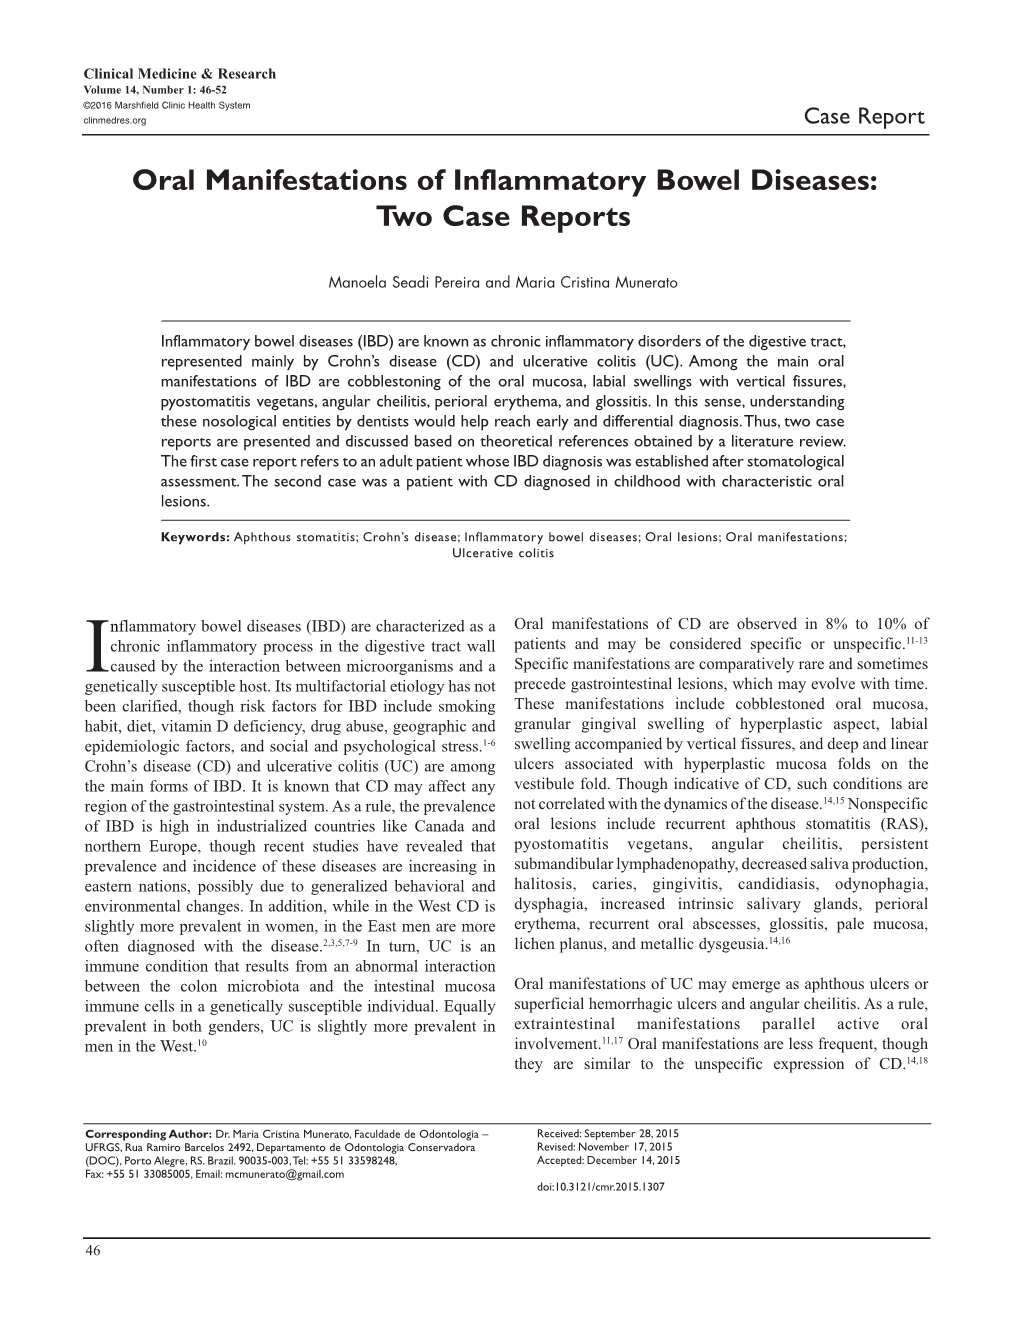 Oral Manifestations of Inflammatory Bowel Diseases: Two Case Reports